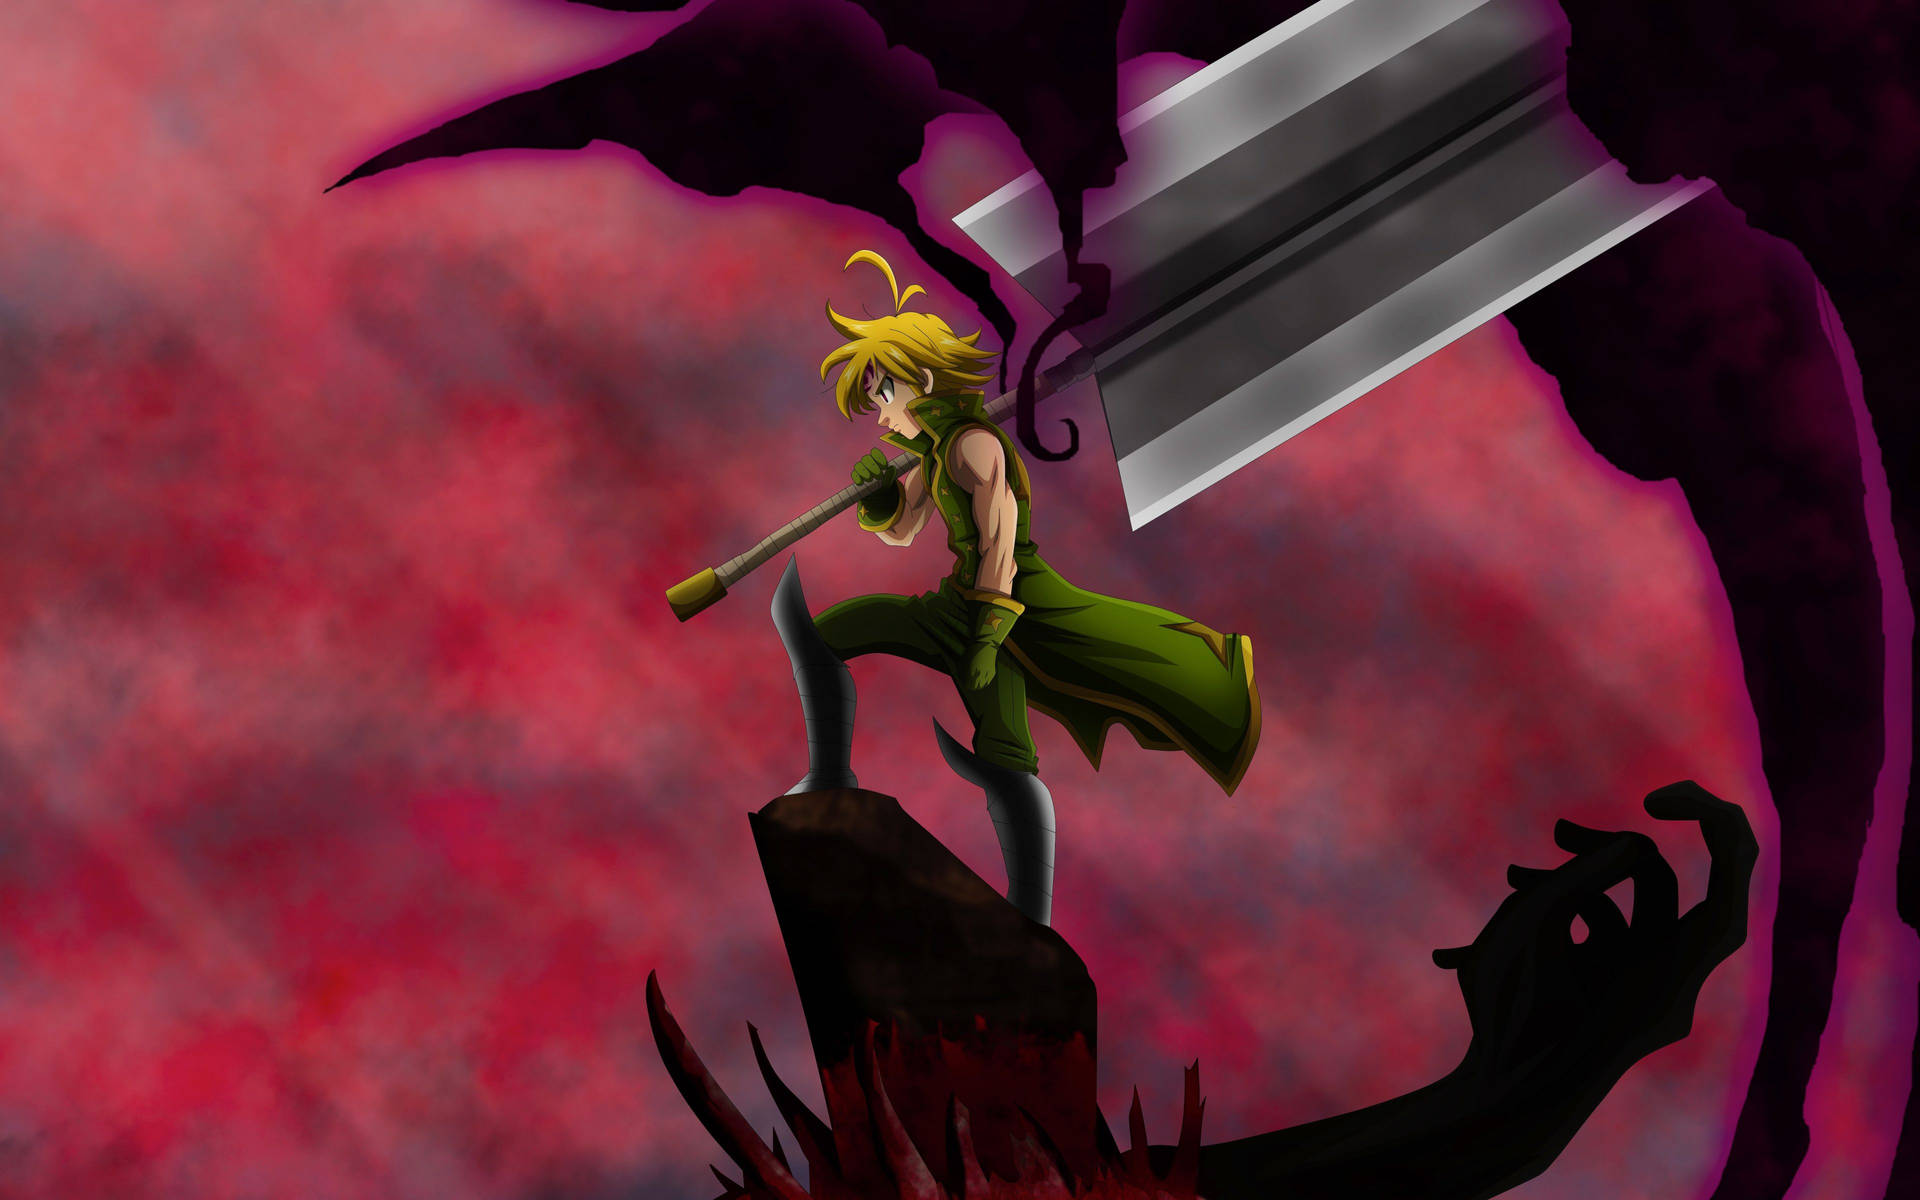 Meliodas, One of the Seven Deadly Sins, Wielding His Giant Broad Sword Wallpaper